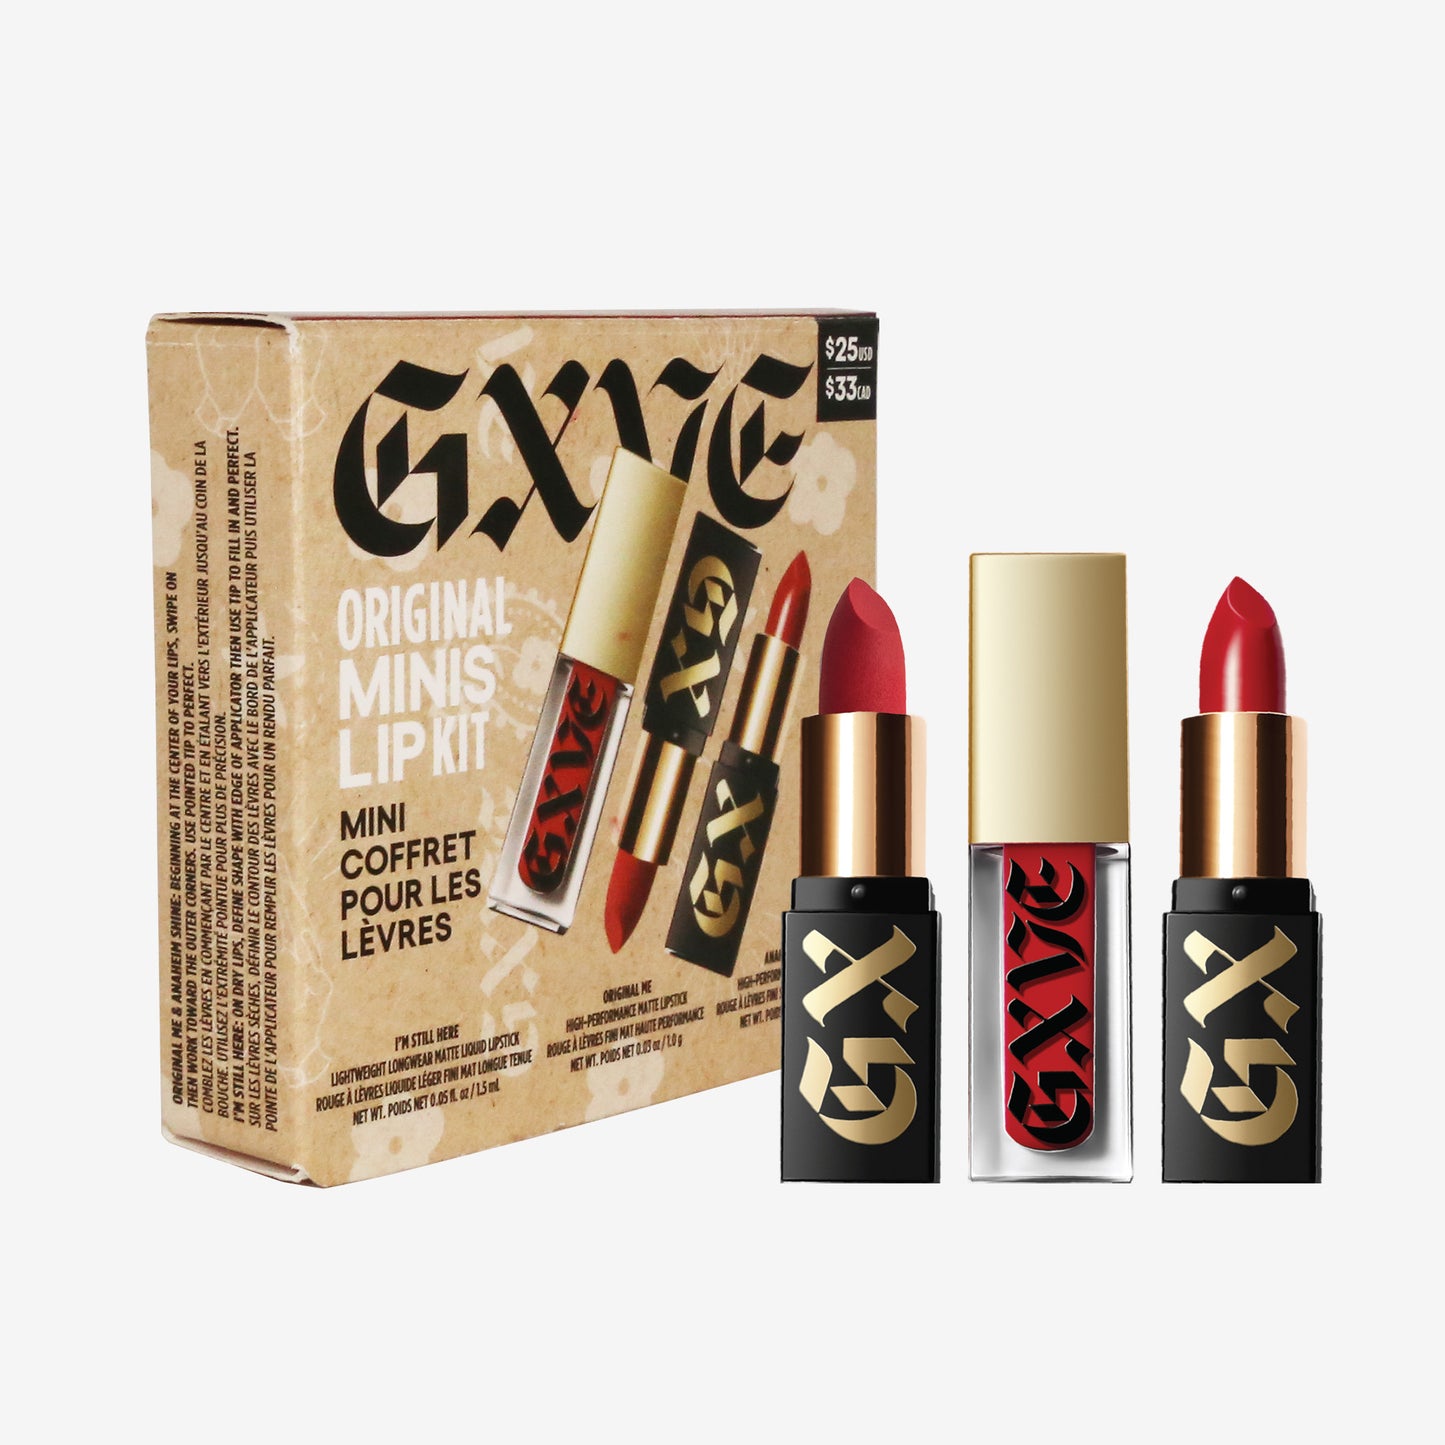 GXVE Original Minis Lip Set - Discover your perfect red lip with this limited-edition mini set featuring Gwen's signature, bestselling shade 